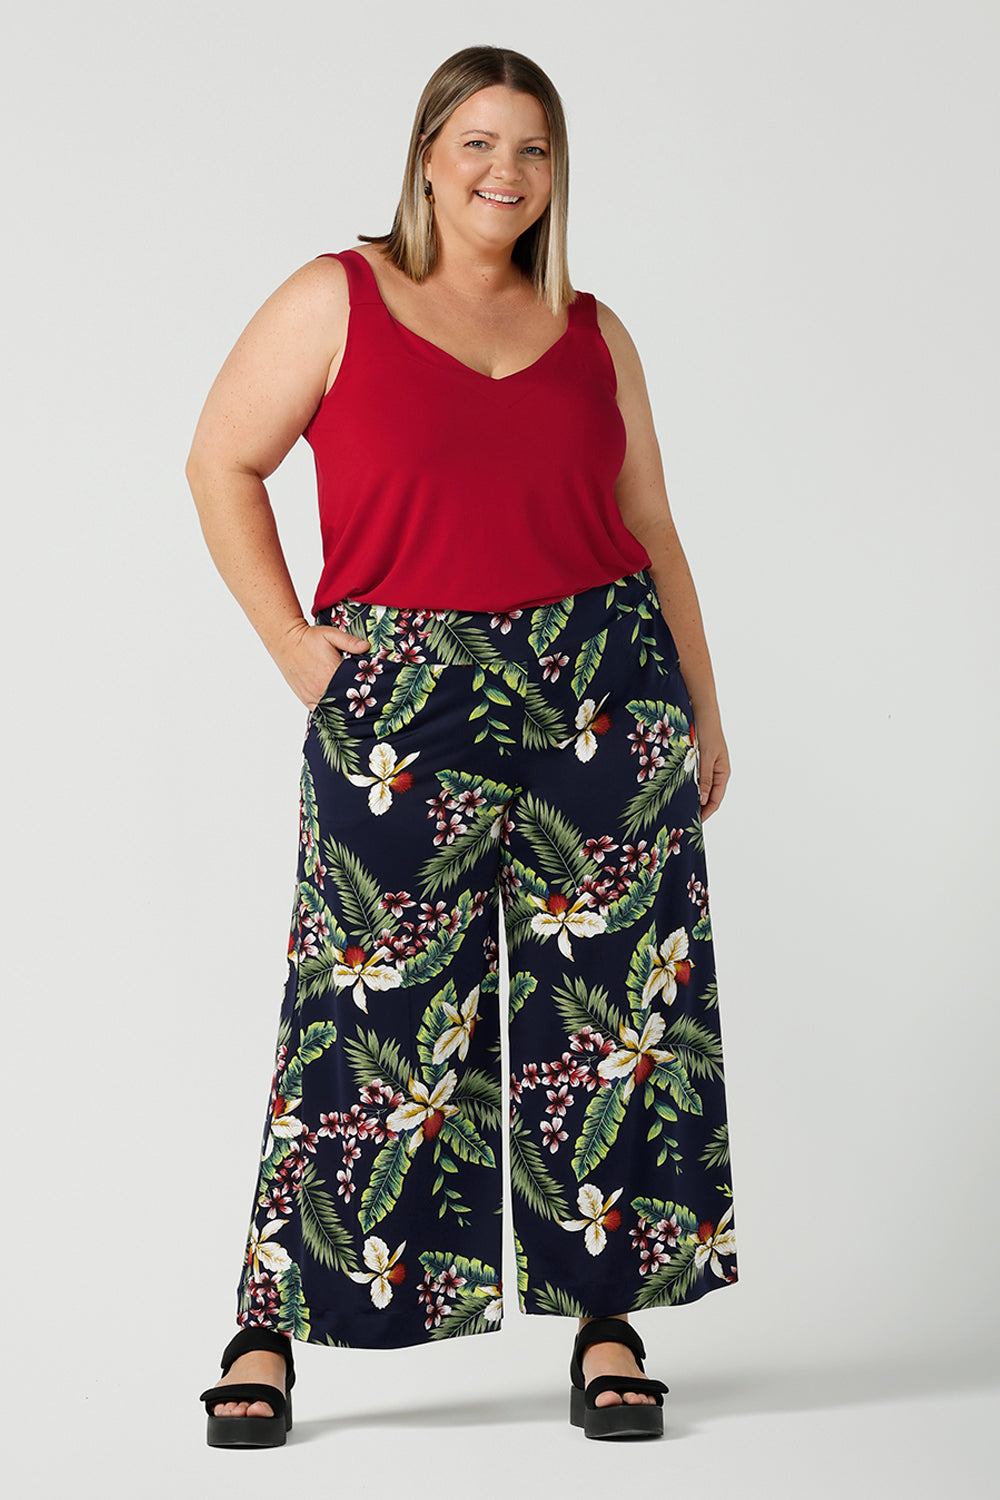 A size 18 curvy and happy woman wears a wide leg dany culotte in in Merriment back with a red cami top. The perfect comfortable Christmas outfit. Made in Australia for women size 8-24.